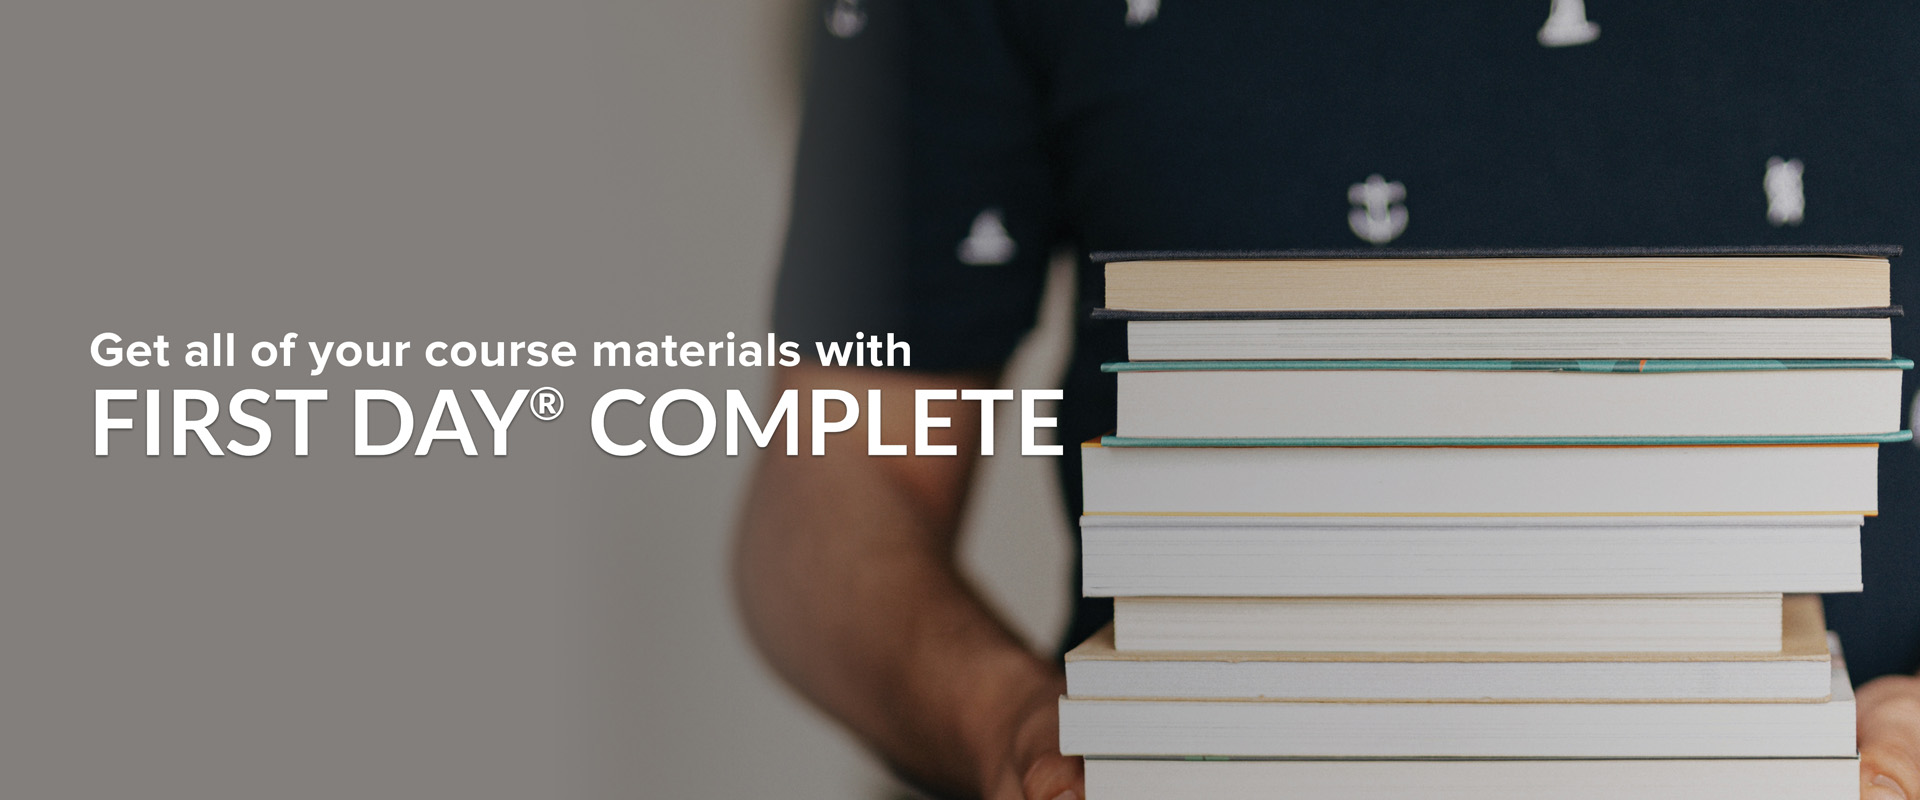 graphic: Get all of your course materials with First Day Complete